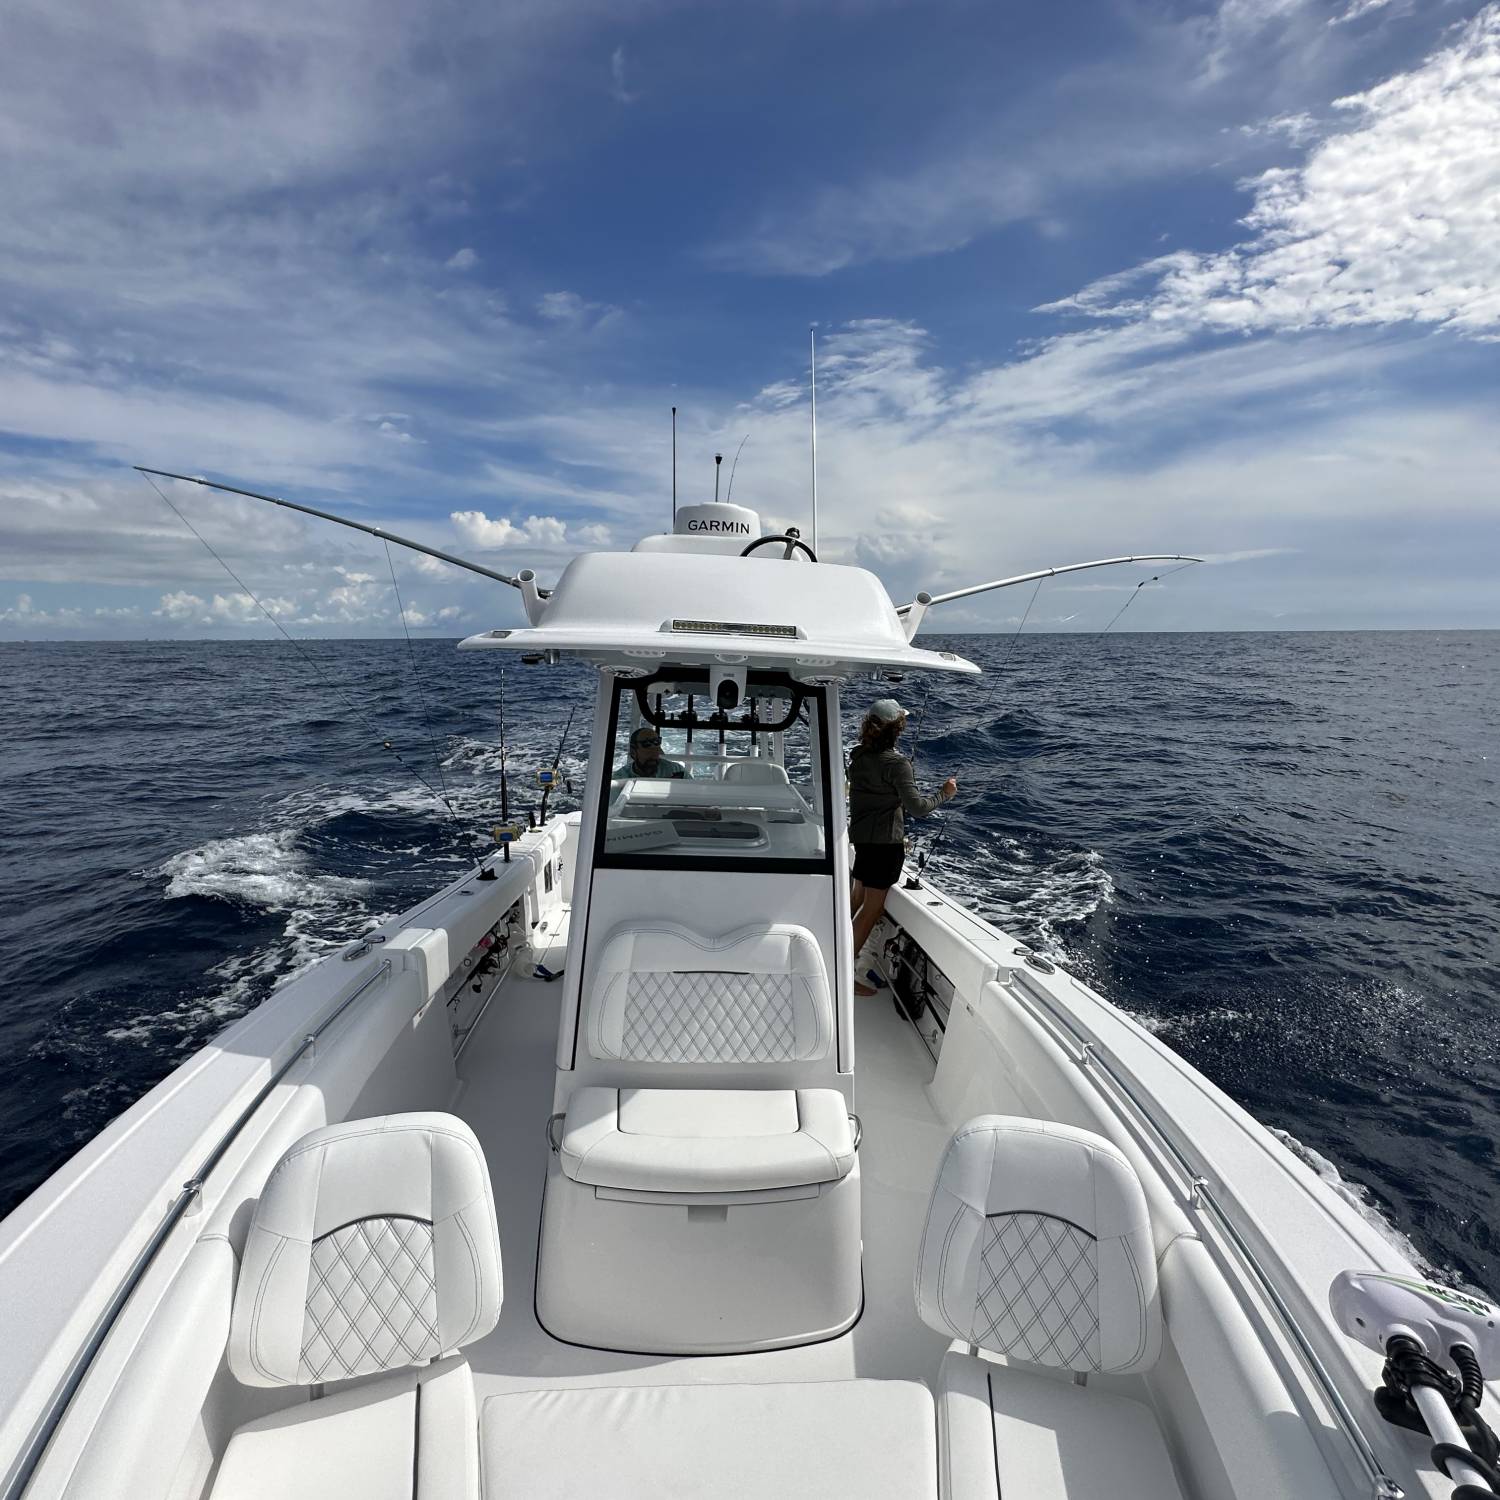 Title: Trolling - On board their Sportsman Open 282 Center Console - Location: Ft Lauderdale, FL. Participating in the Photo Contest #SportsmanJune2023